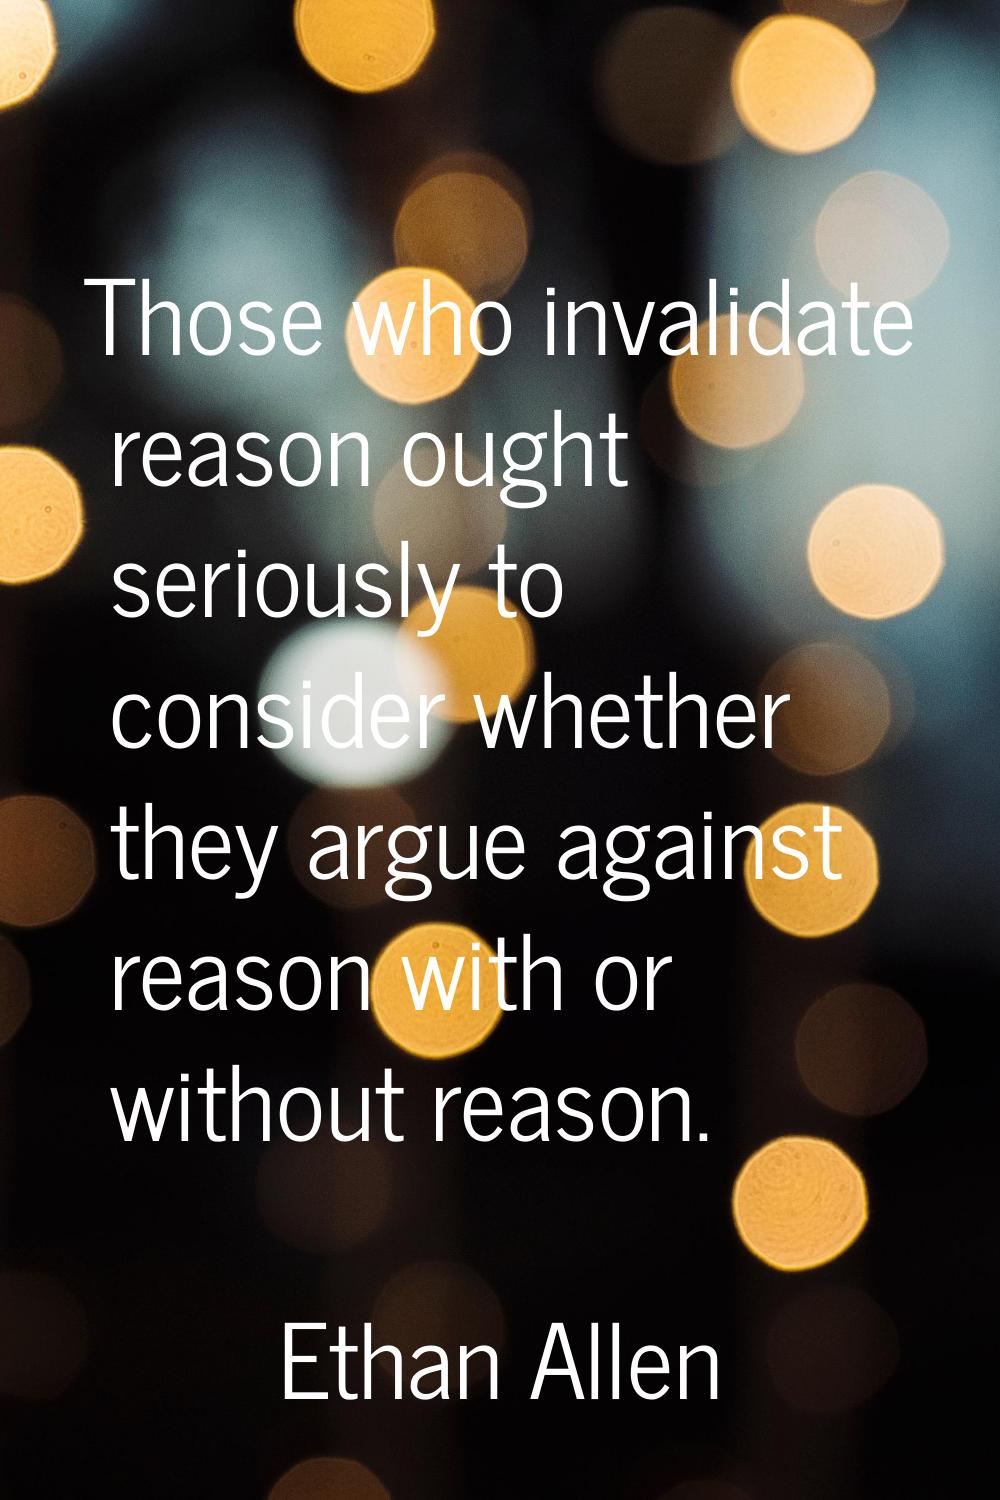 Those who invalidate reason ought seriously to consider whether they argue against reason with or w